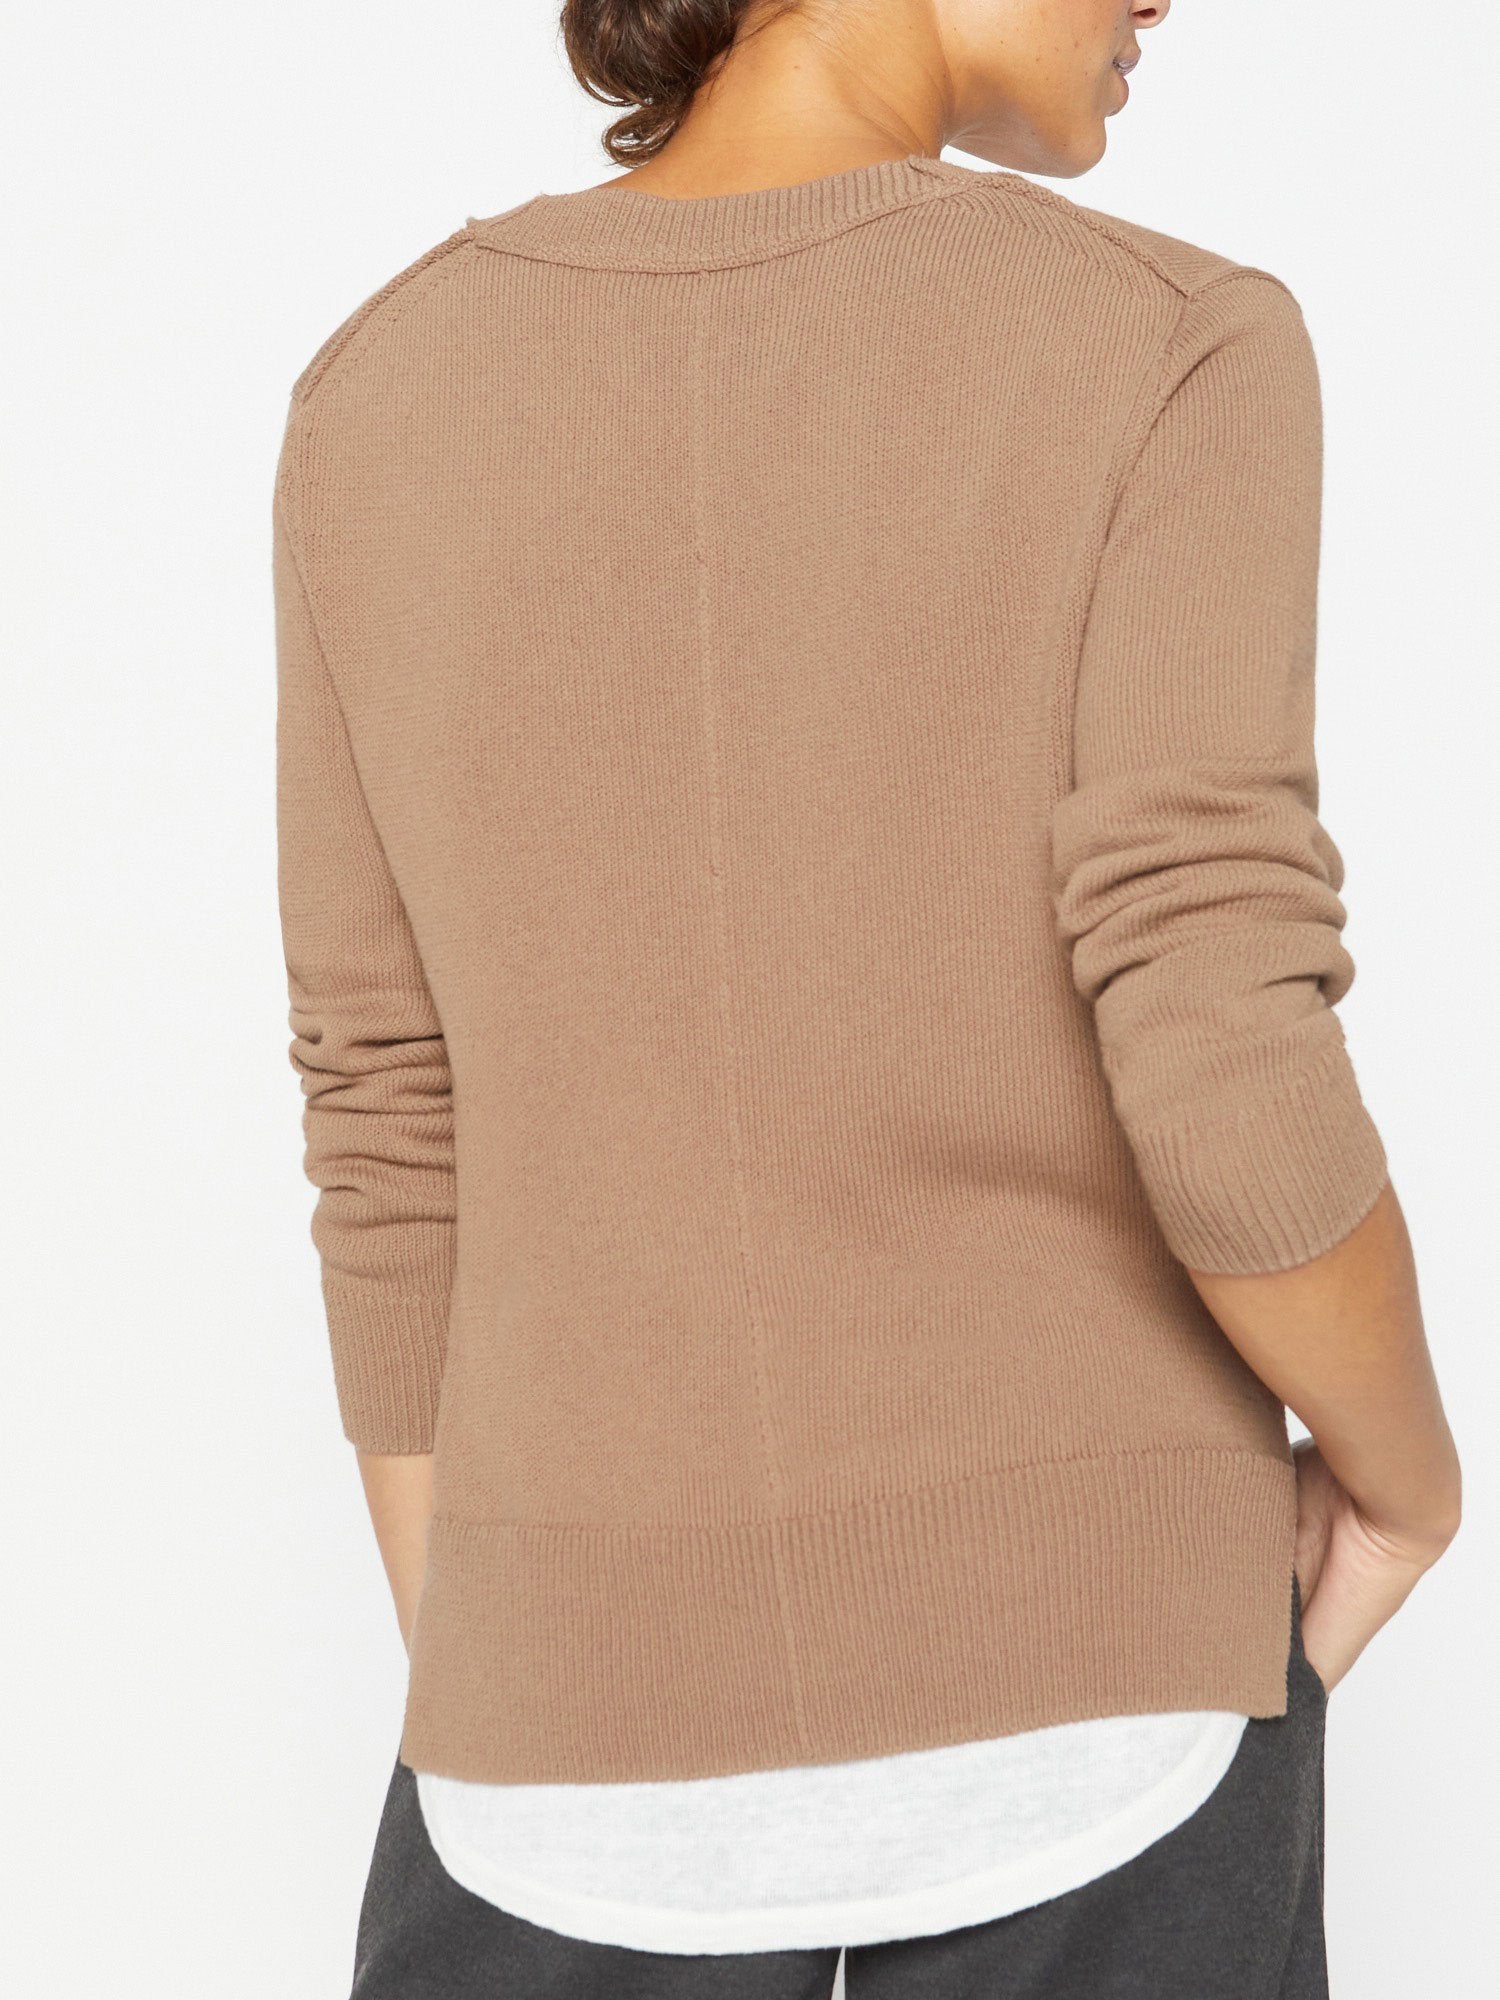 The Roan Layered Henley